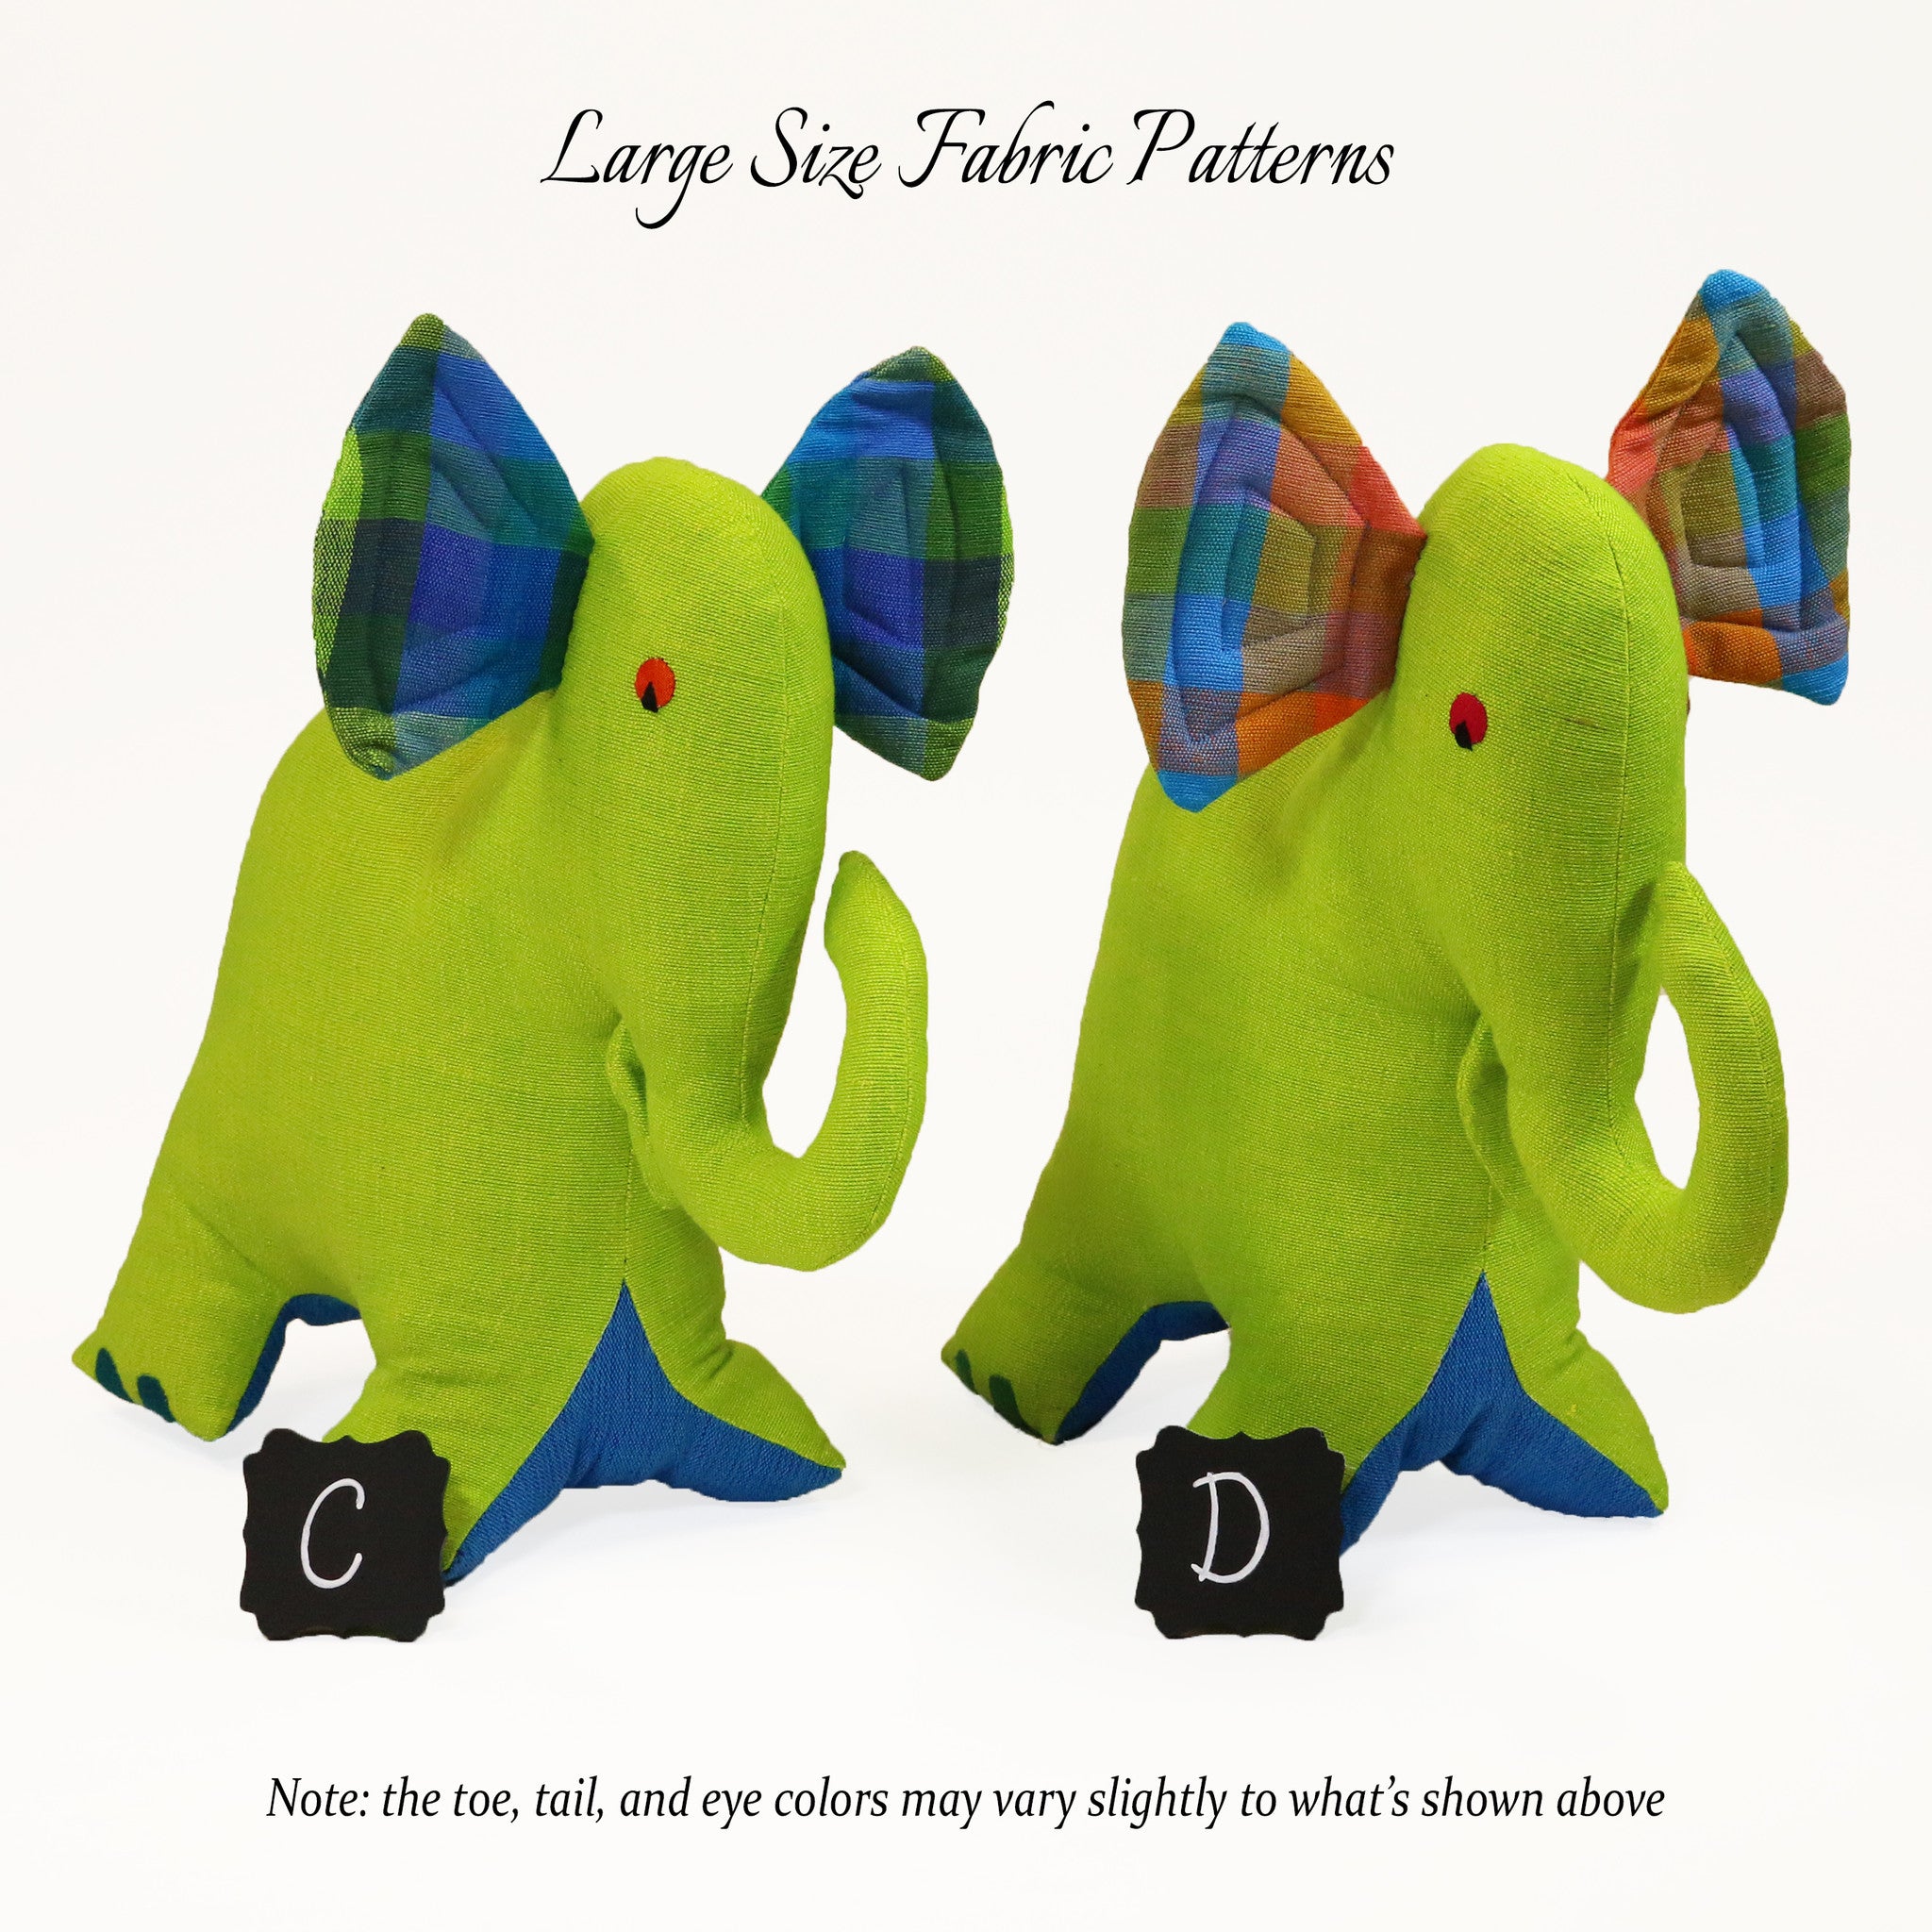 Evan, the Elephant – large size fabric patterns shown